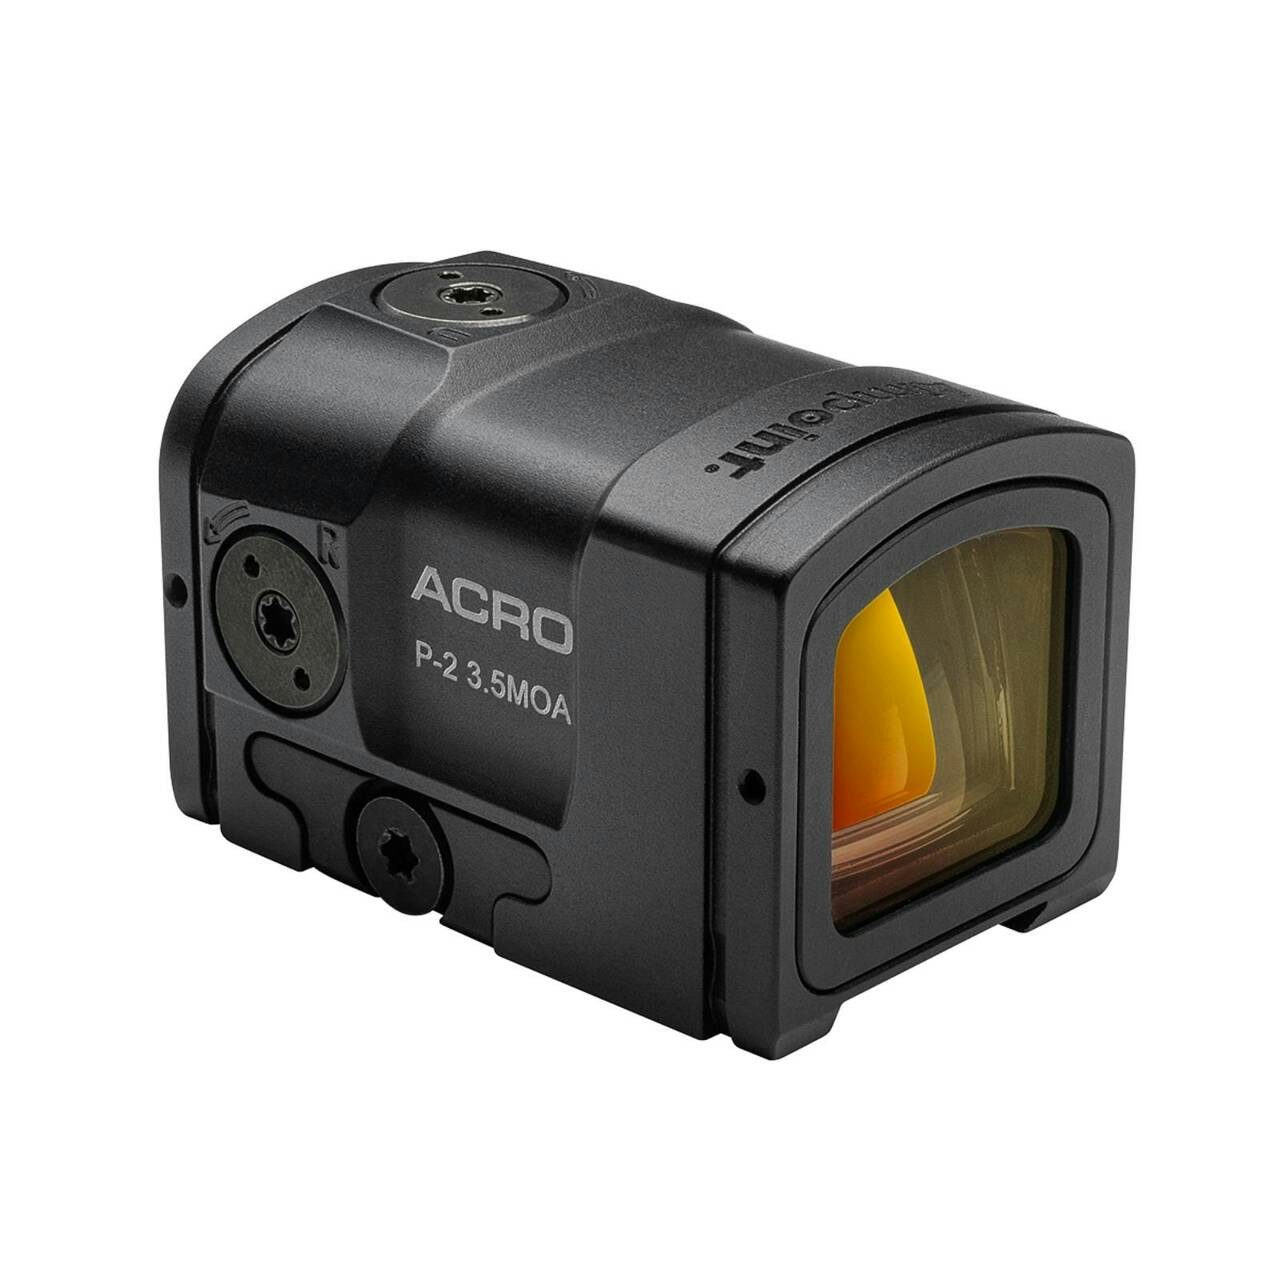 Aimpoint ACRO® P-2 Red Dot Reflex Sight